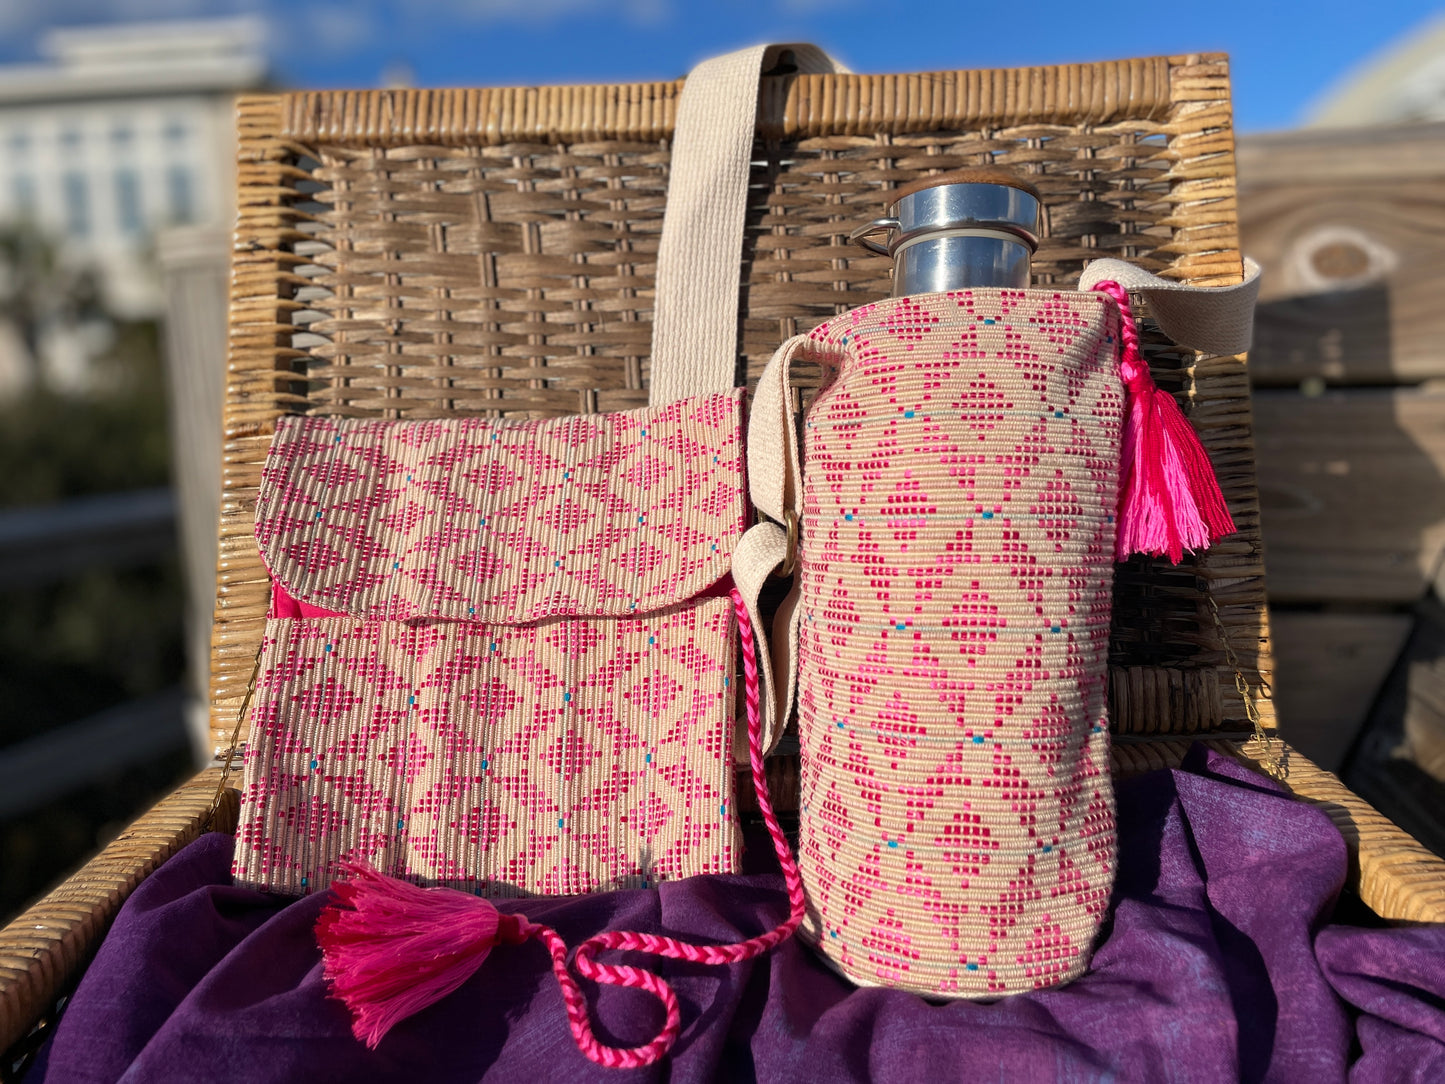 The "Day Tripper" Travel Accessory Bundle